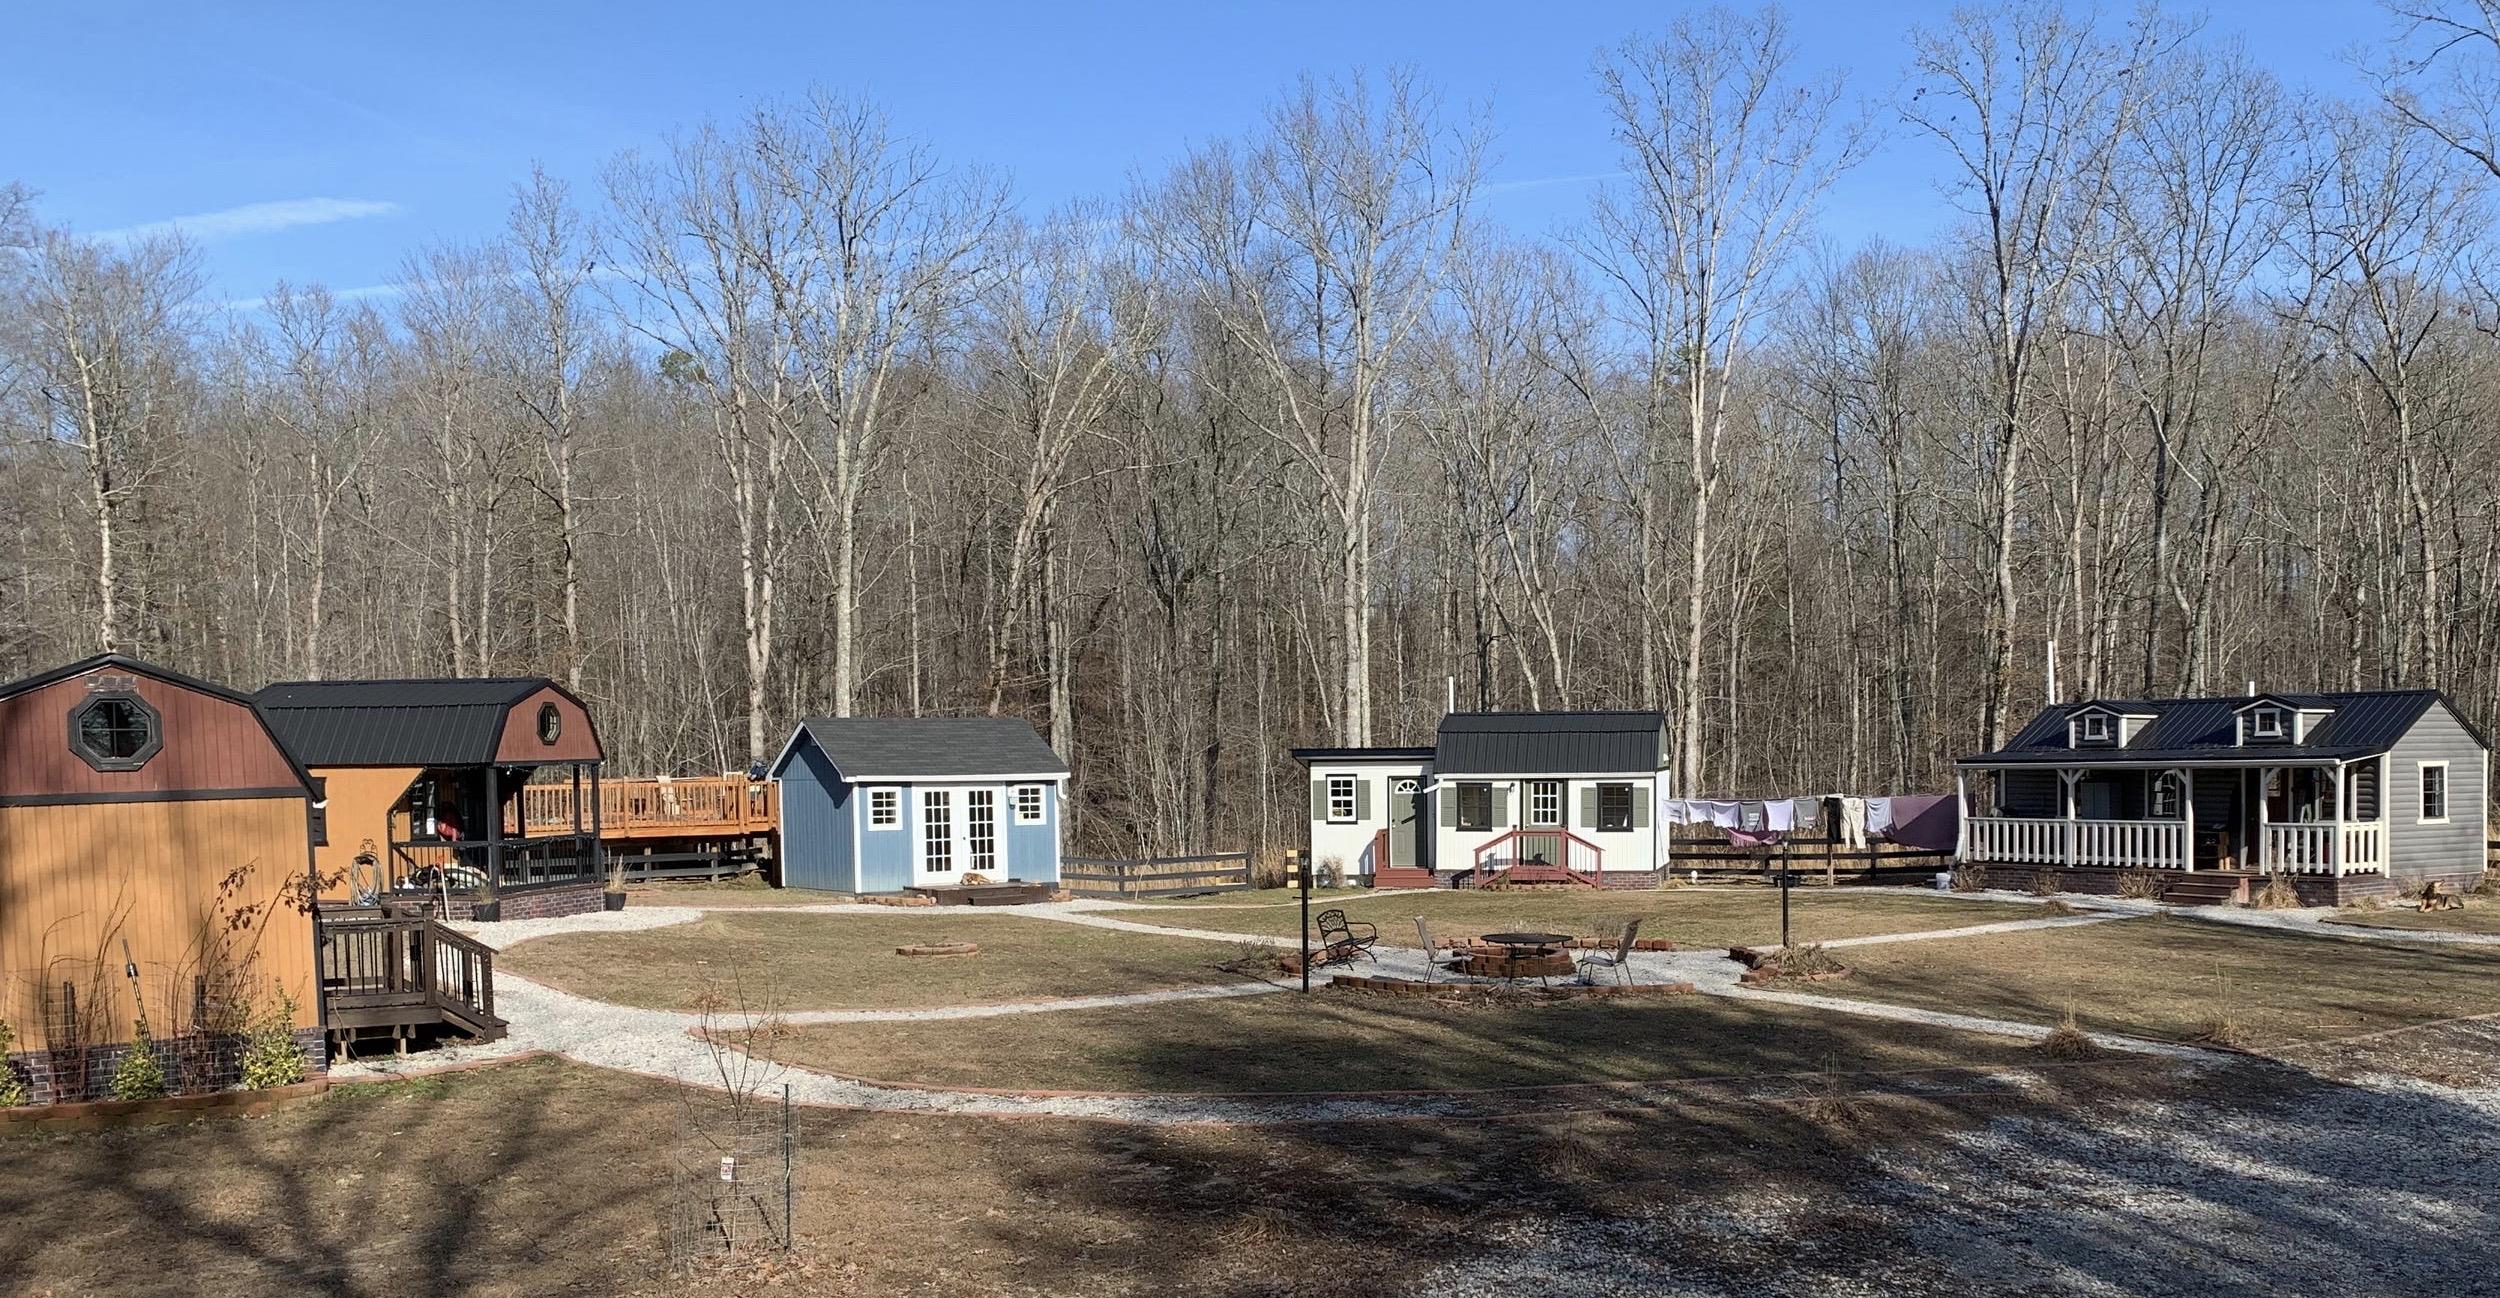 This family built a private tiny-house village where the kids each have their own homes